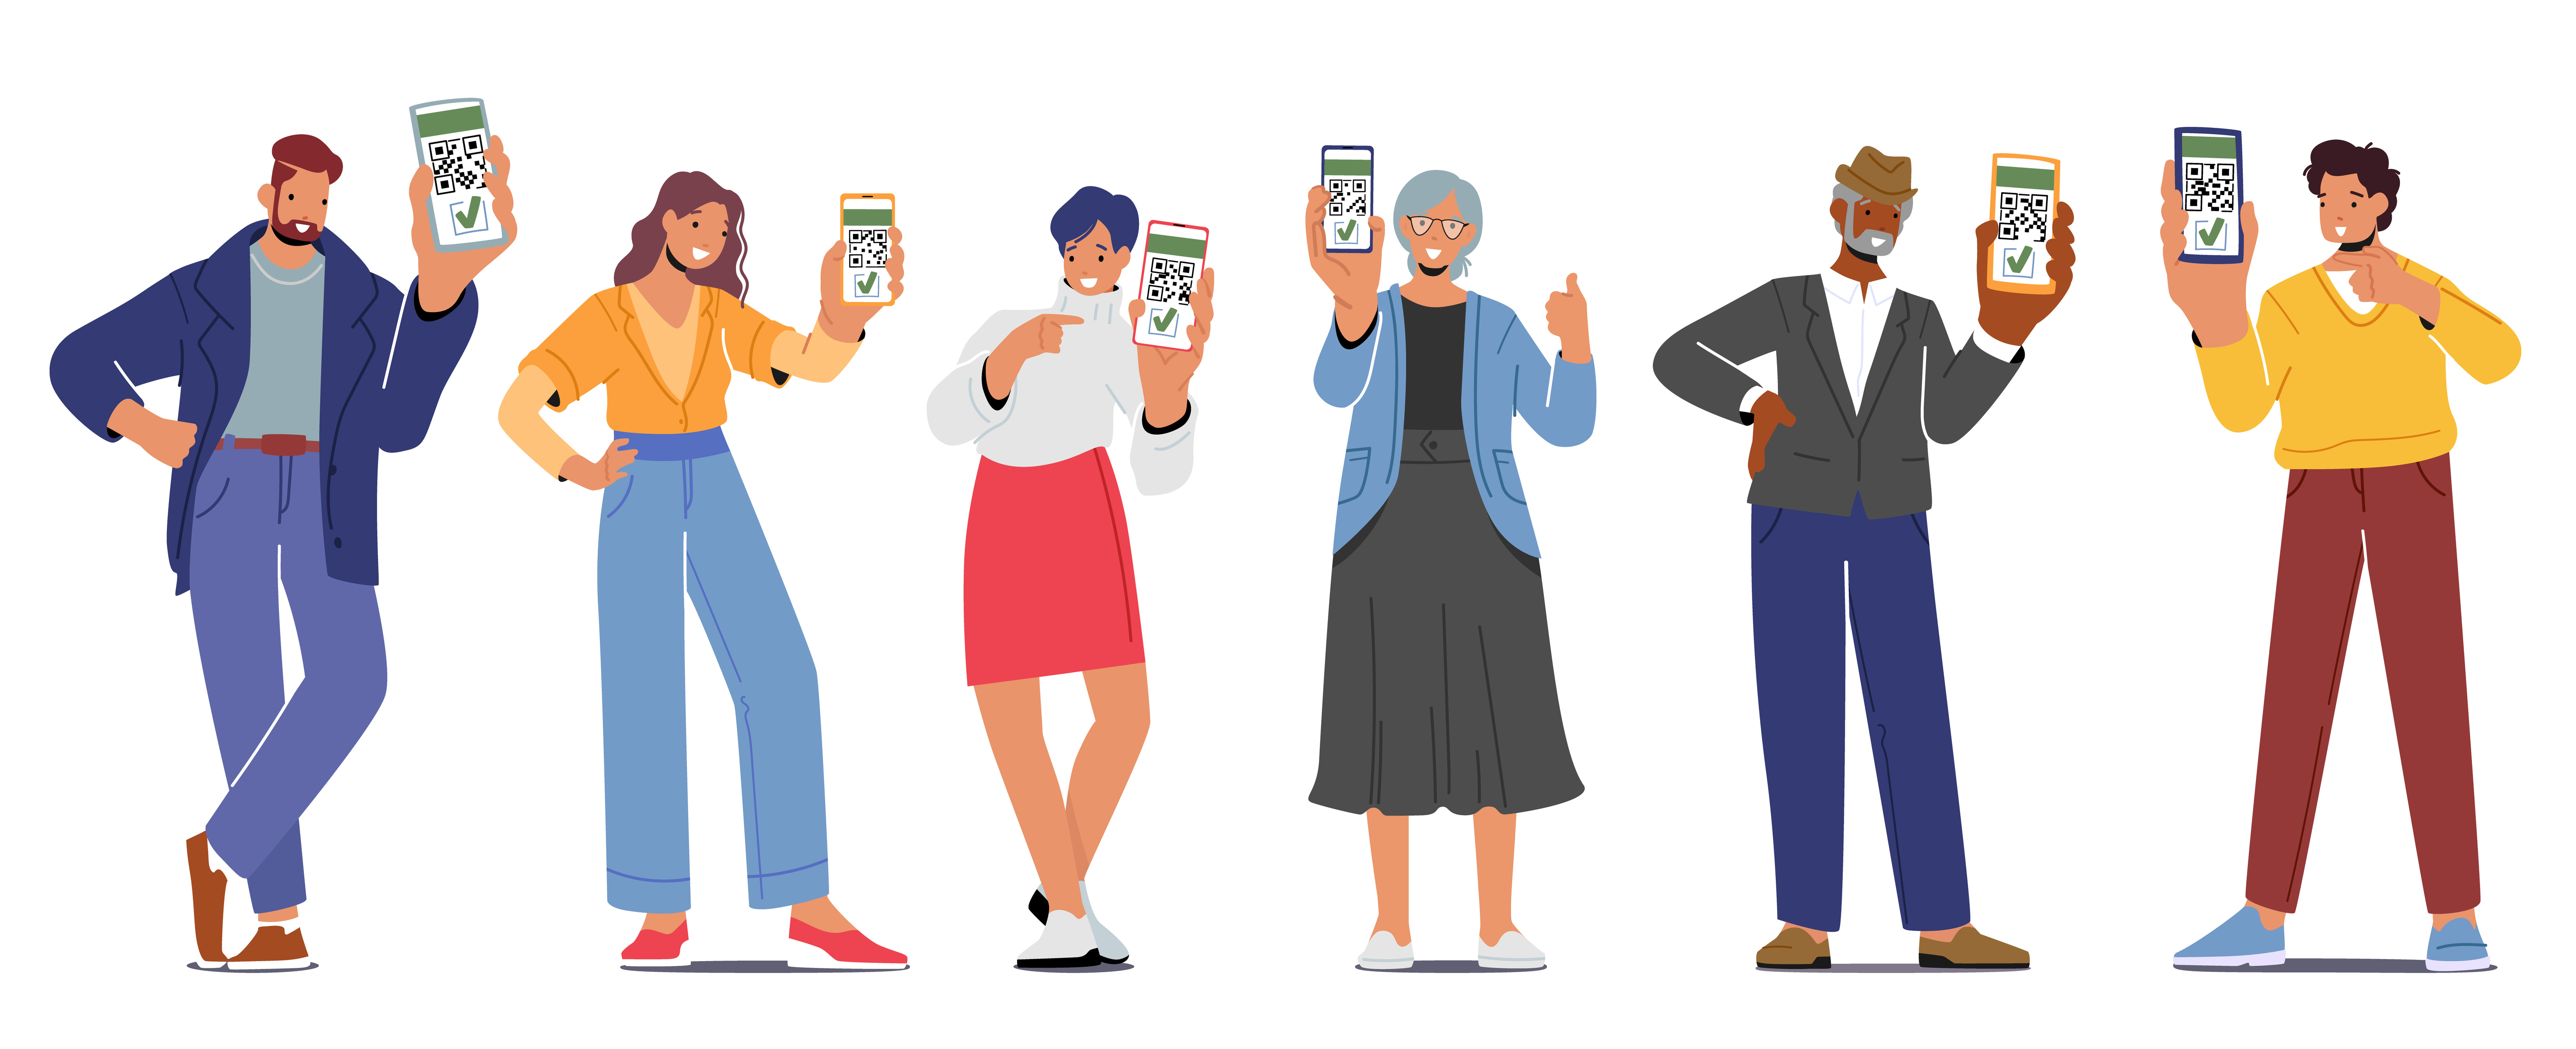 cartoon of 6 people standing holding cell phones showing 2 factor authentication